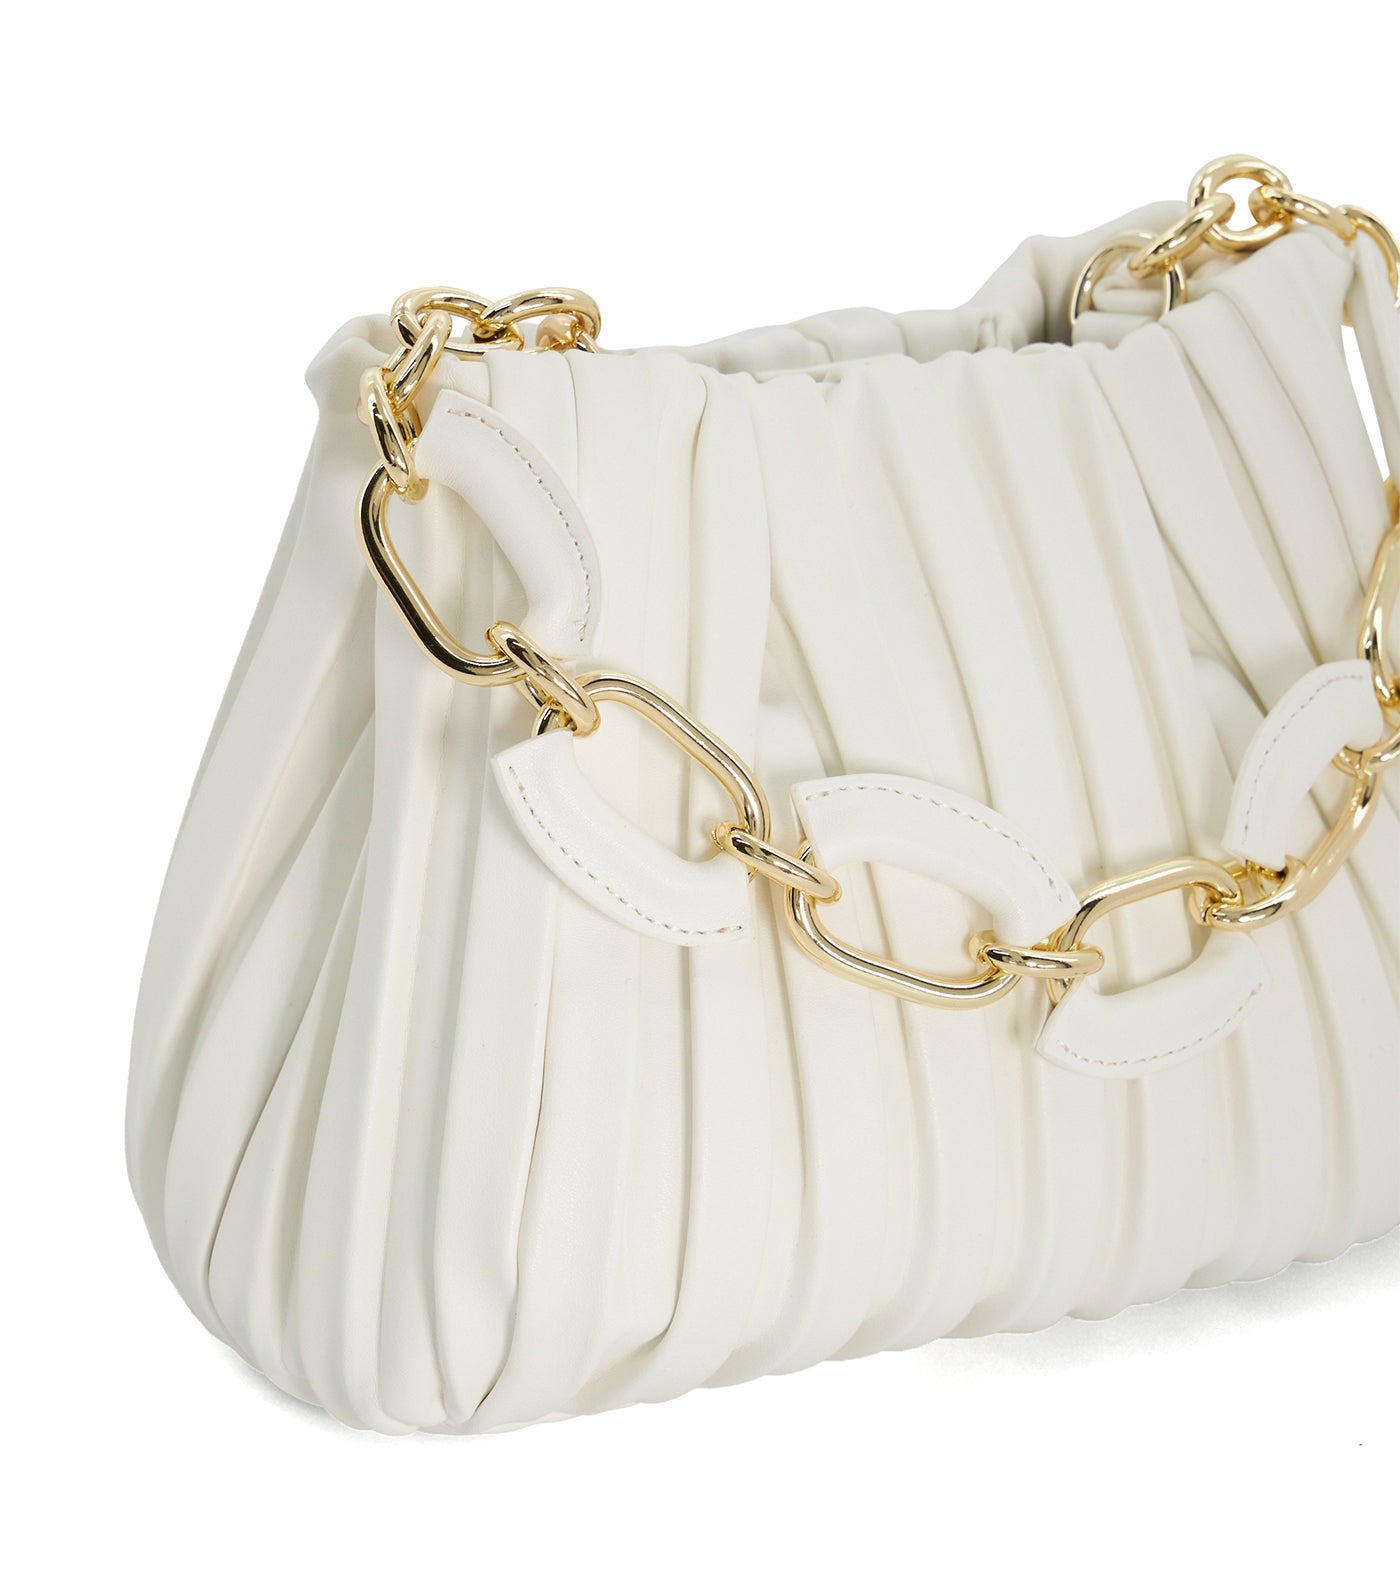 Dinidominie Small Metallic Pleat Chain-Handle Slouch Bag White-Plain Synthetic